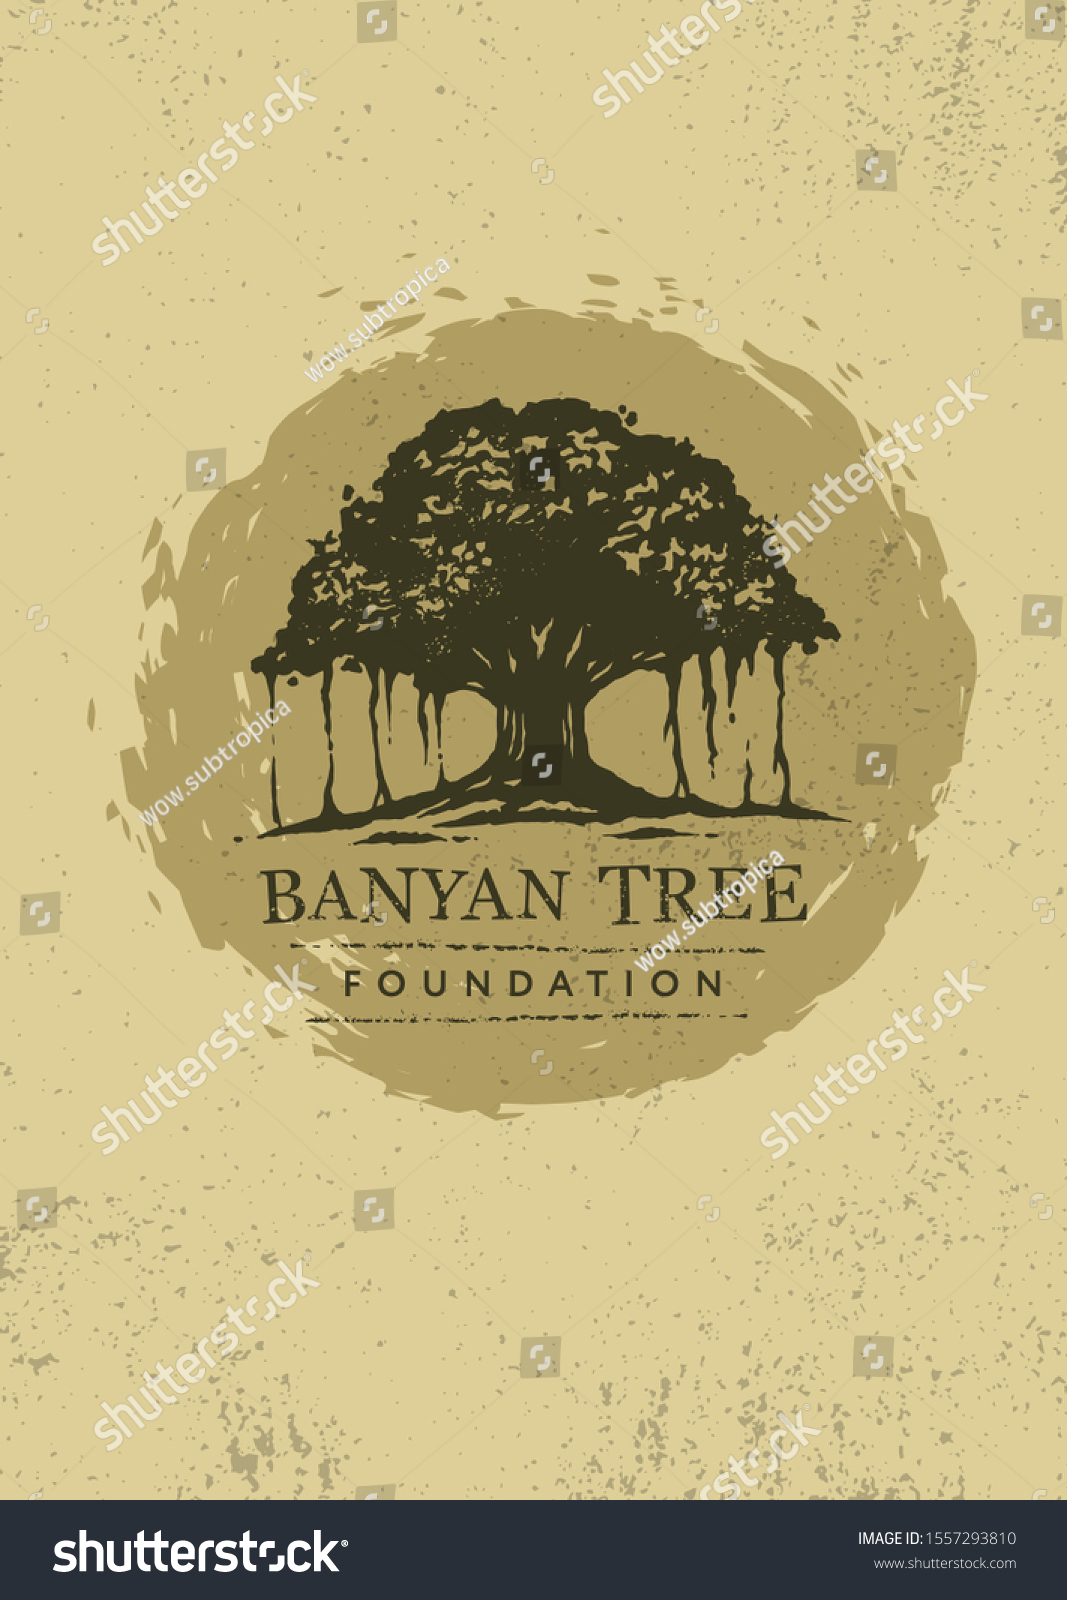 SVG of Banyan Tree Vector Sign. Creative Organic Natural Design Element On Rough Background.  svg